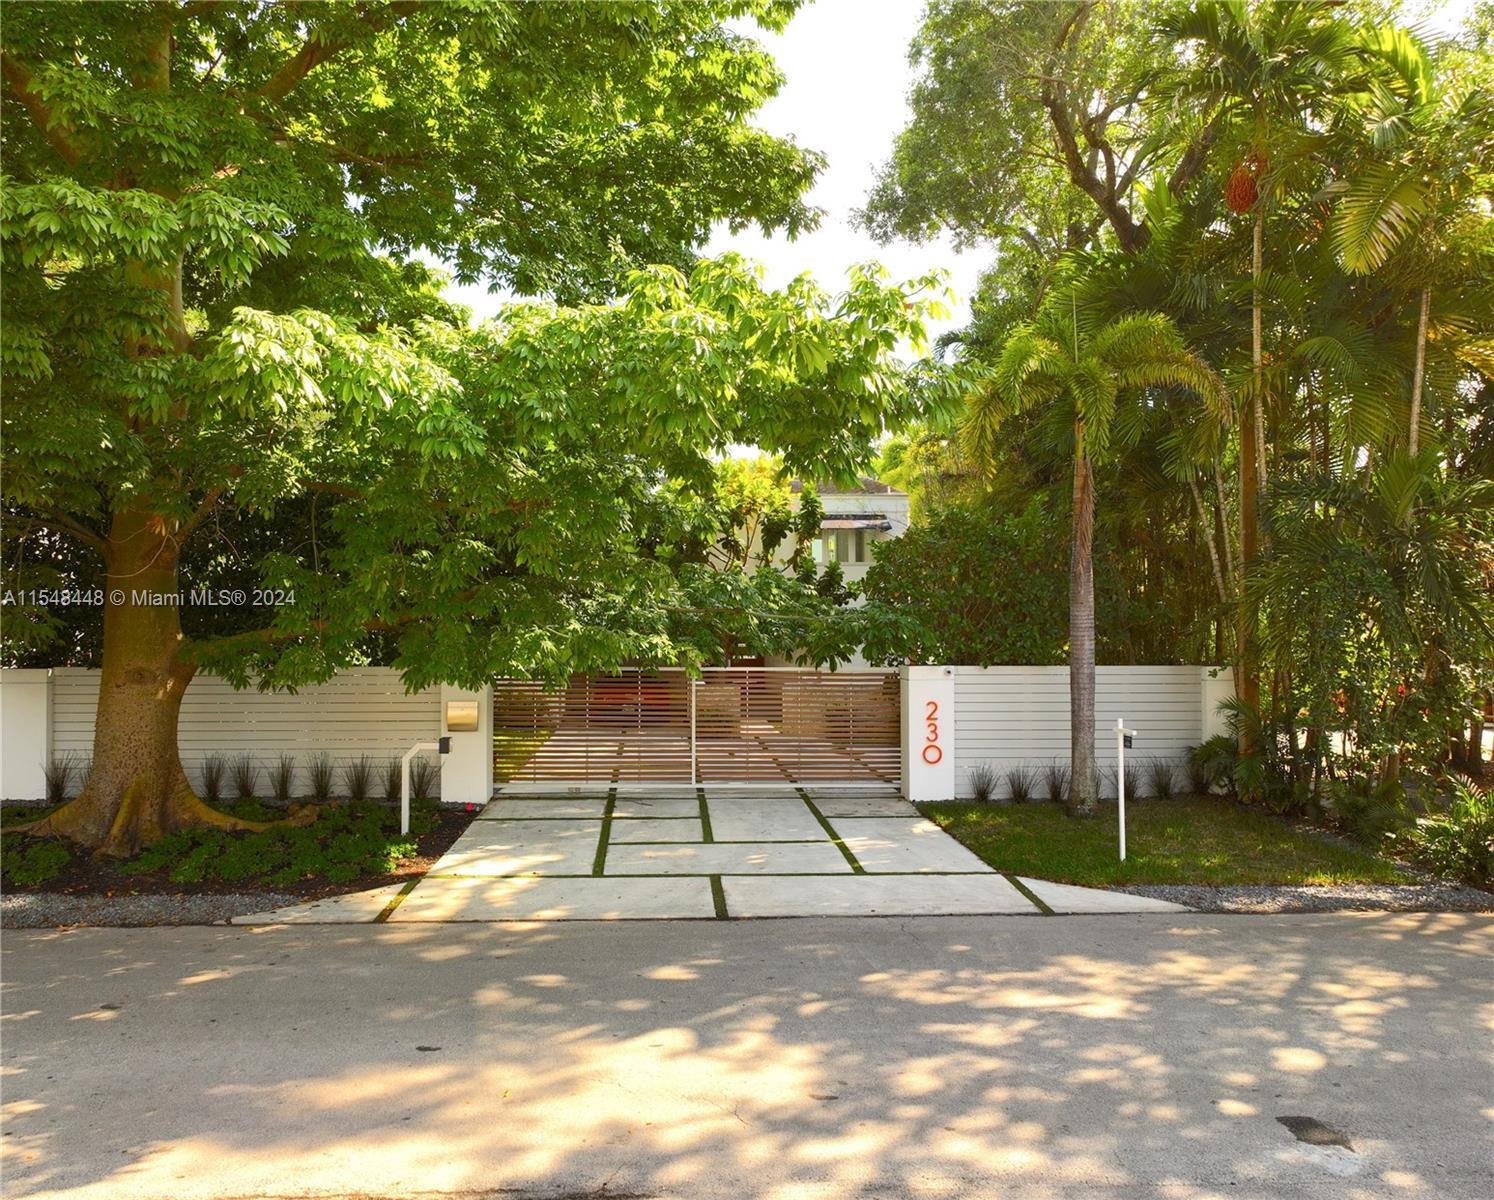 Photo of 230 Ridgewood Rd in Coral Gables, FL